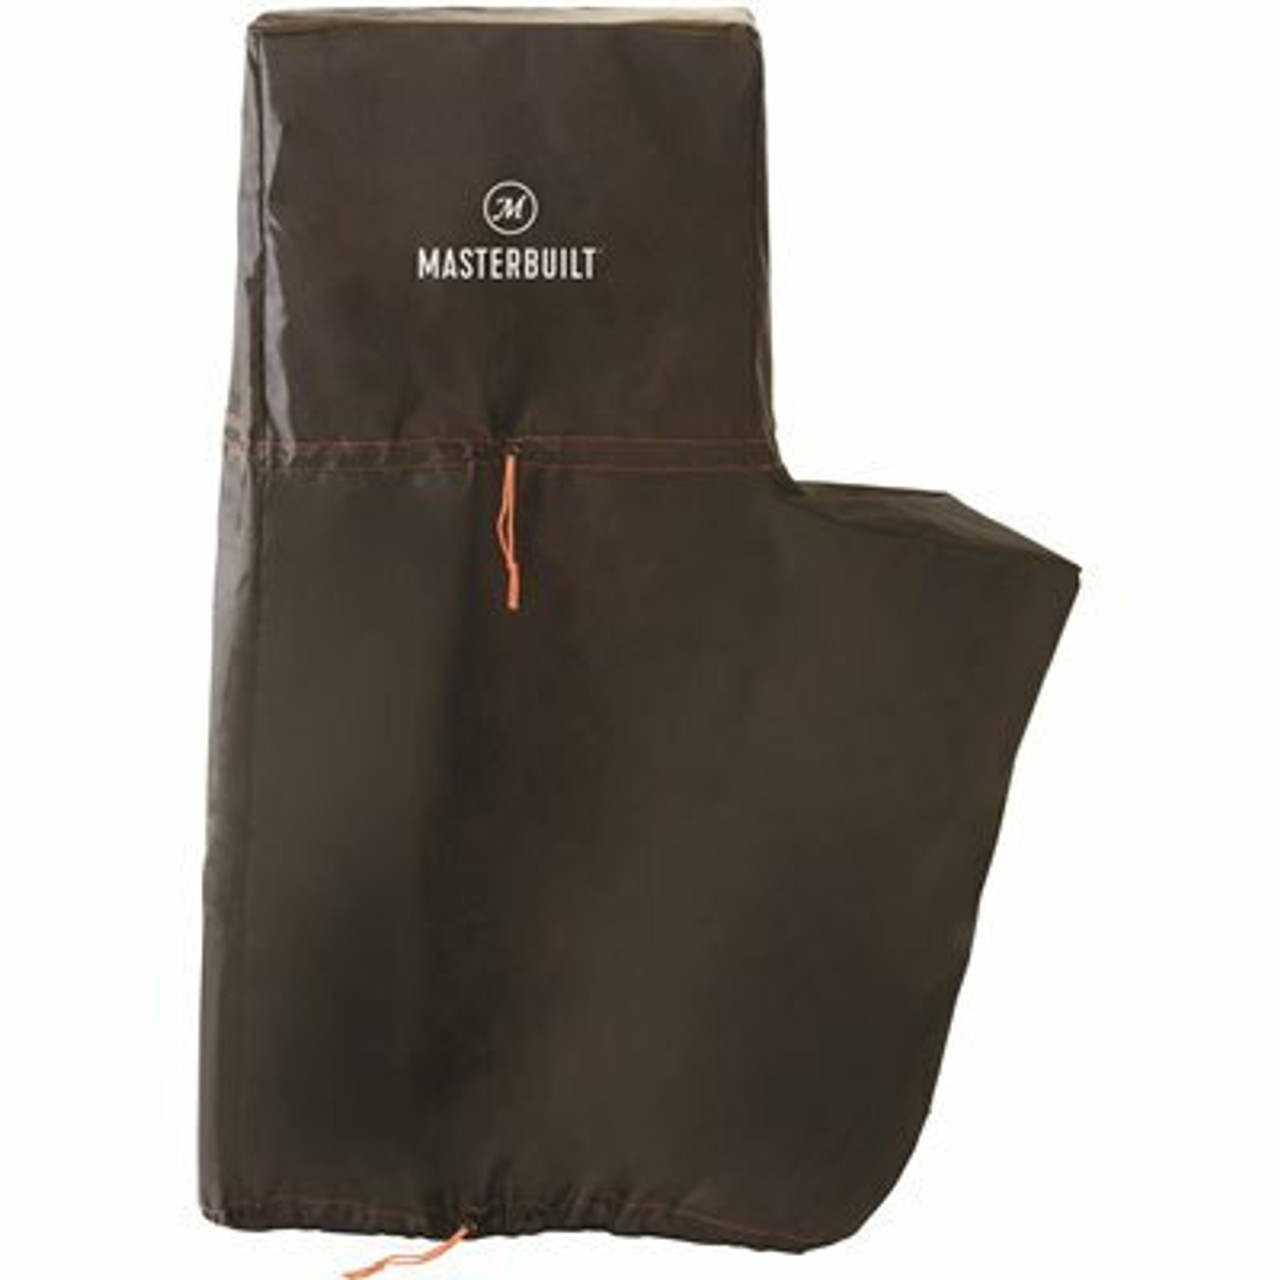 Masterbuilt 51 In. Thermotemp Xl And Pellet Smoker Cover